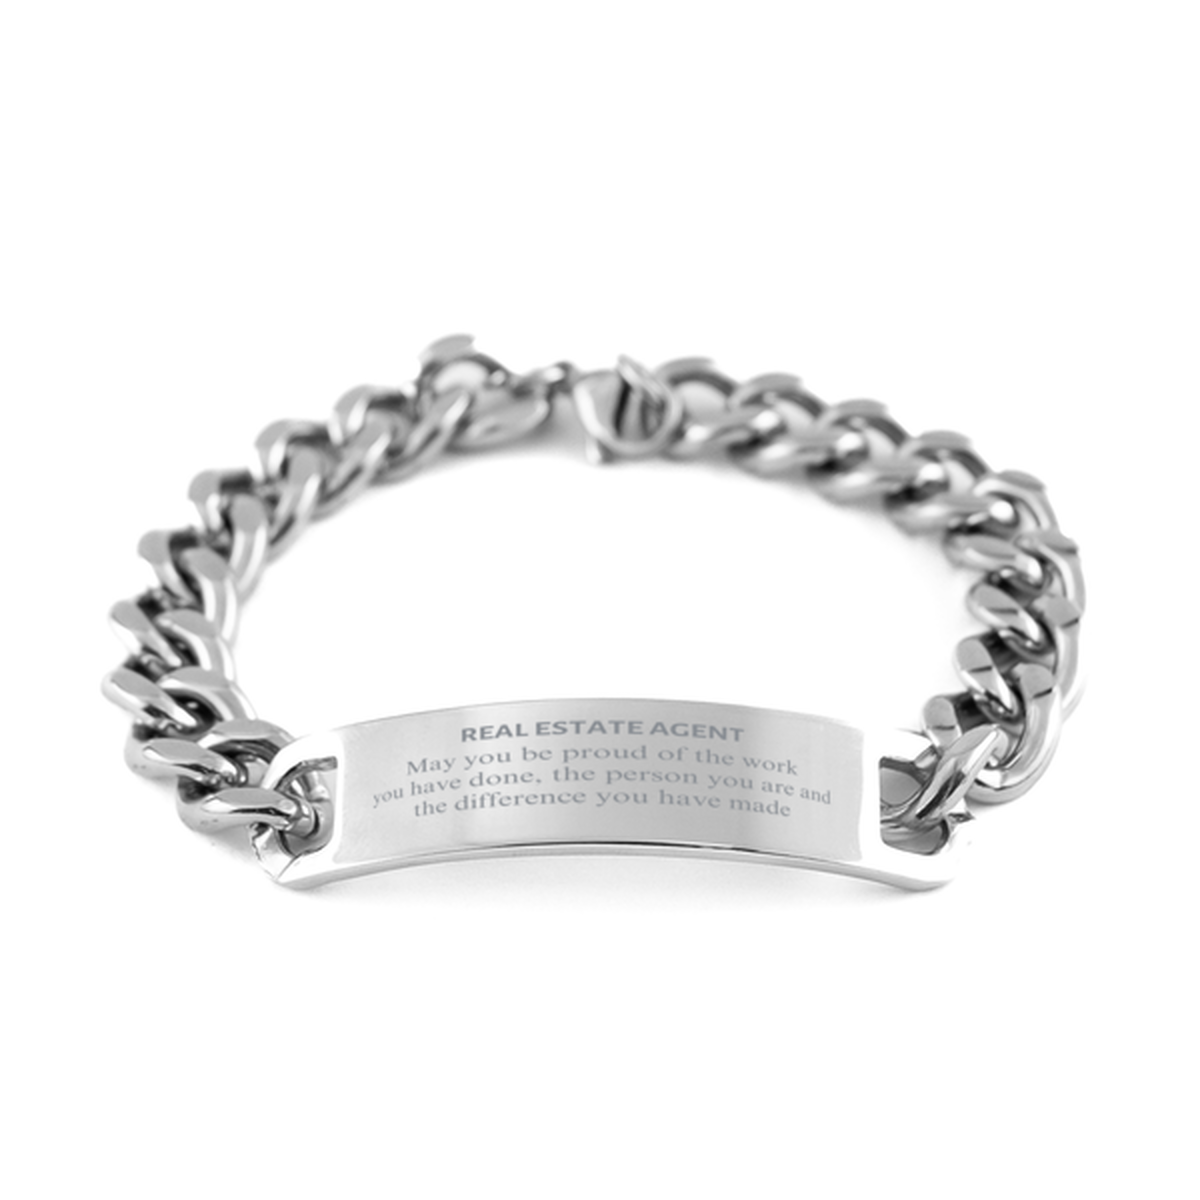 Real Estate Agent May you be proud of the work you have done, Retirement Real Estate Agent Cuban Chain Stainless Steel Bracelet for Colleague Appreciation Gifts Amazing for Real Estate Agent